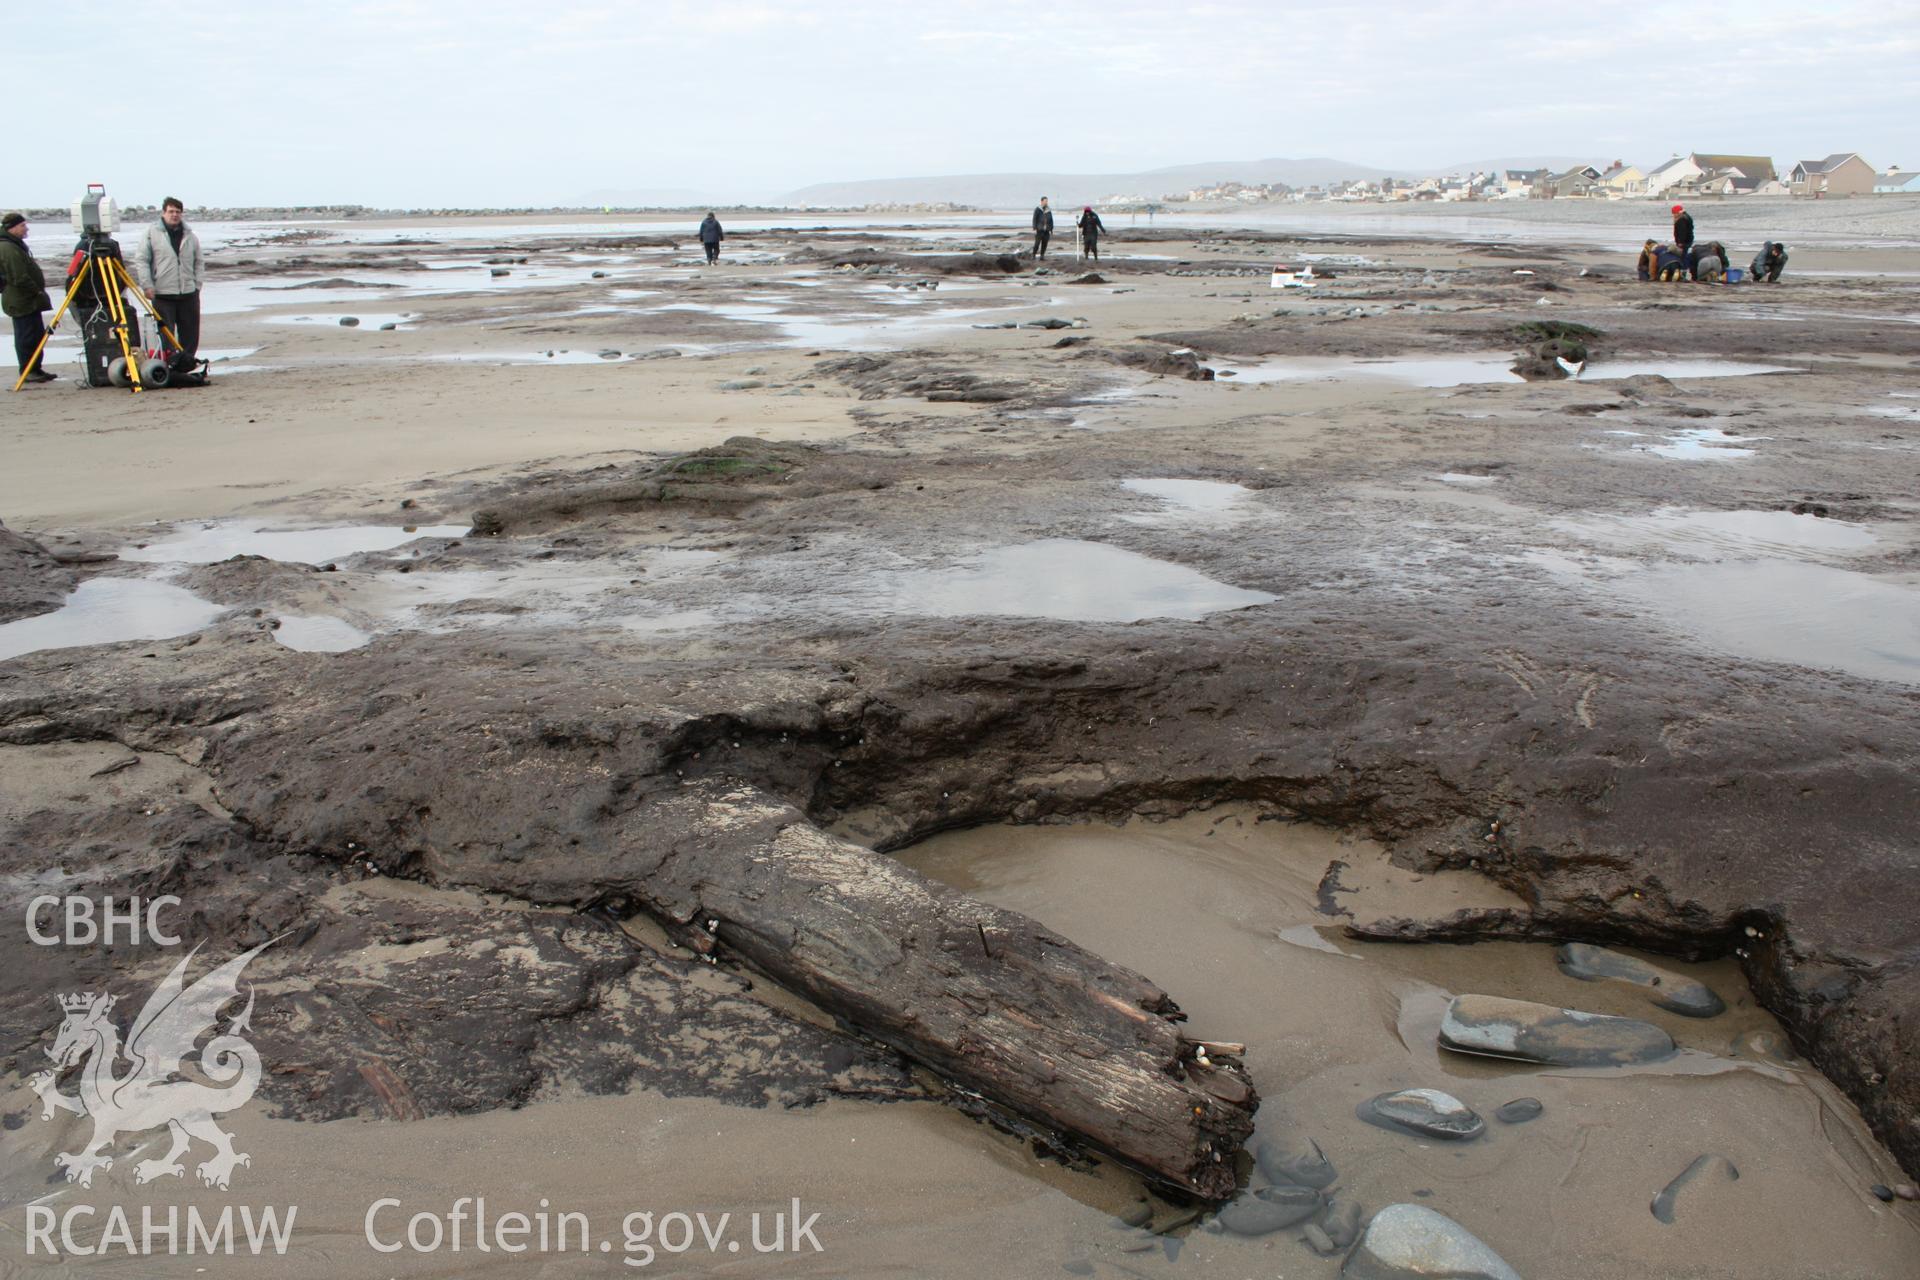 Borth submerged forest (between RNLI lifeboat station and upper Borth), looking northeast towards High Street and lifeboat station. Showing close-up of peat surface with preserved tree remains